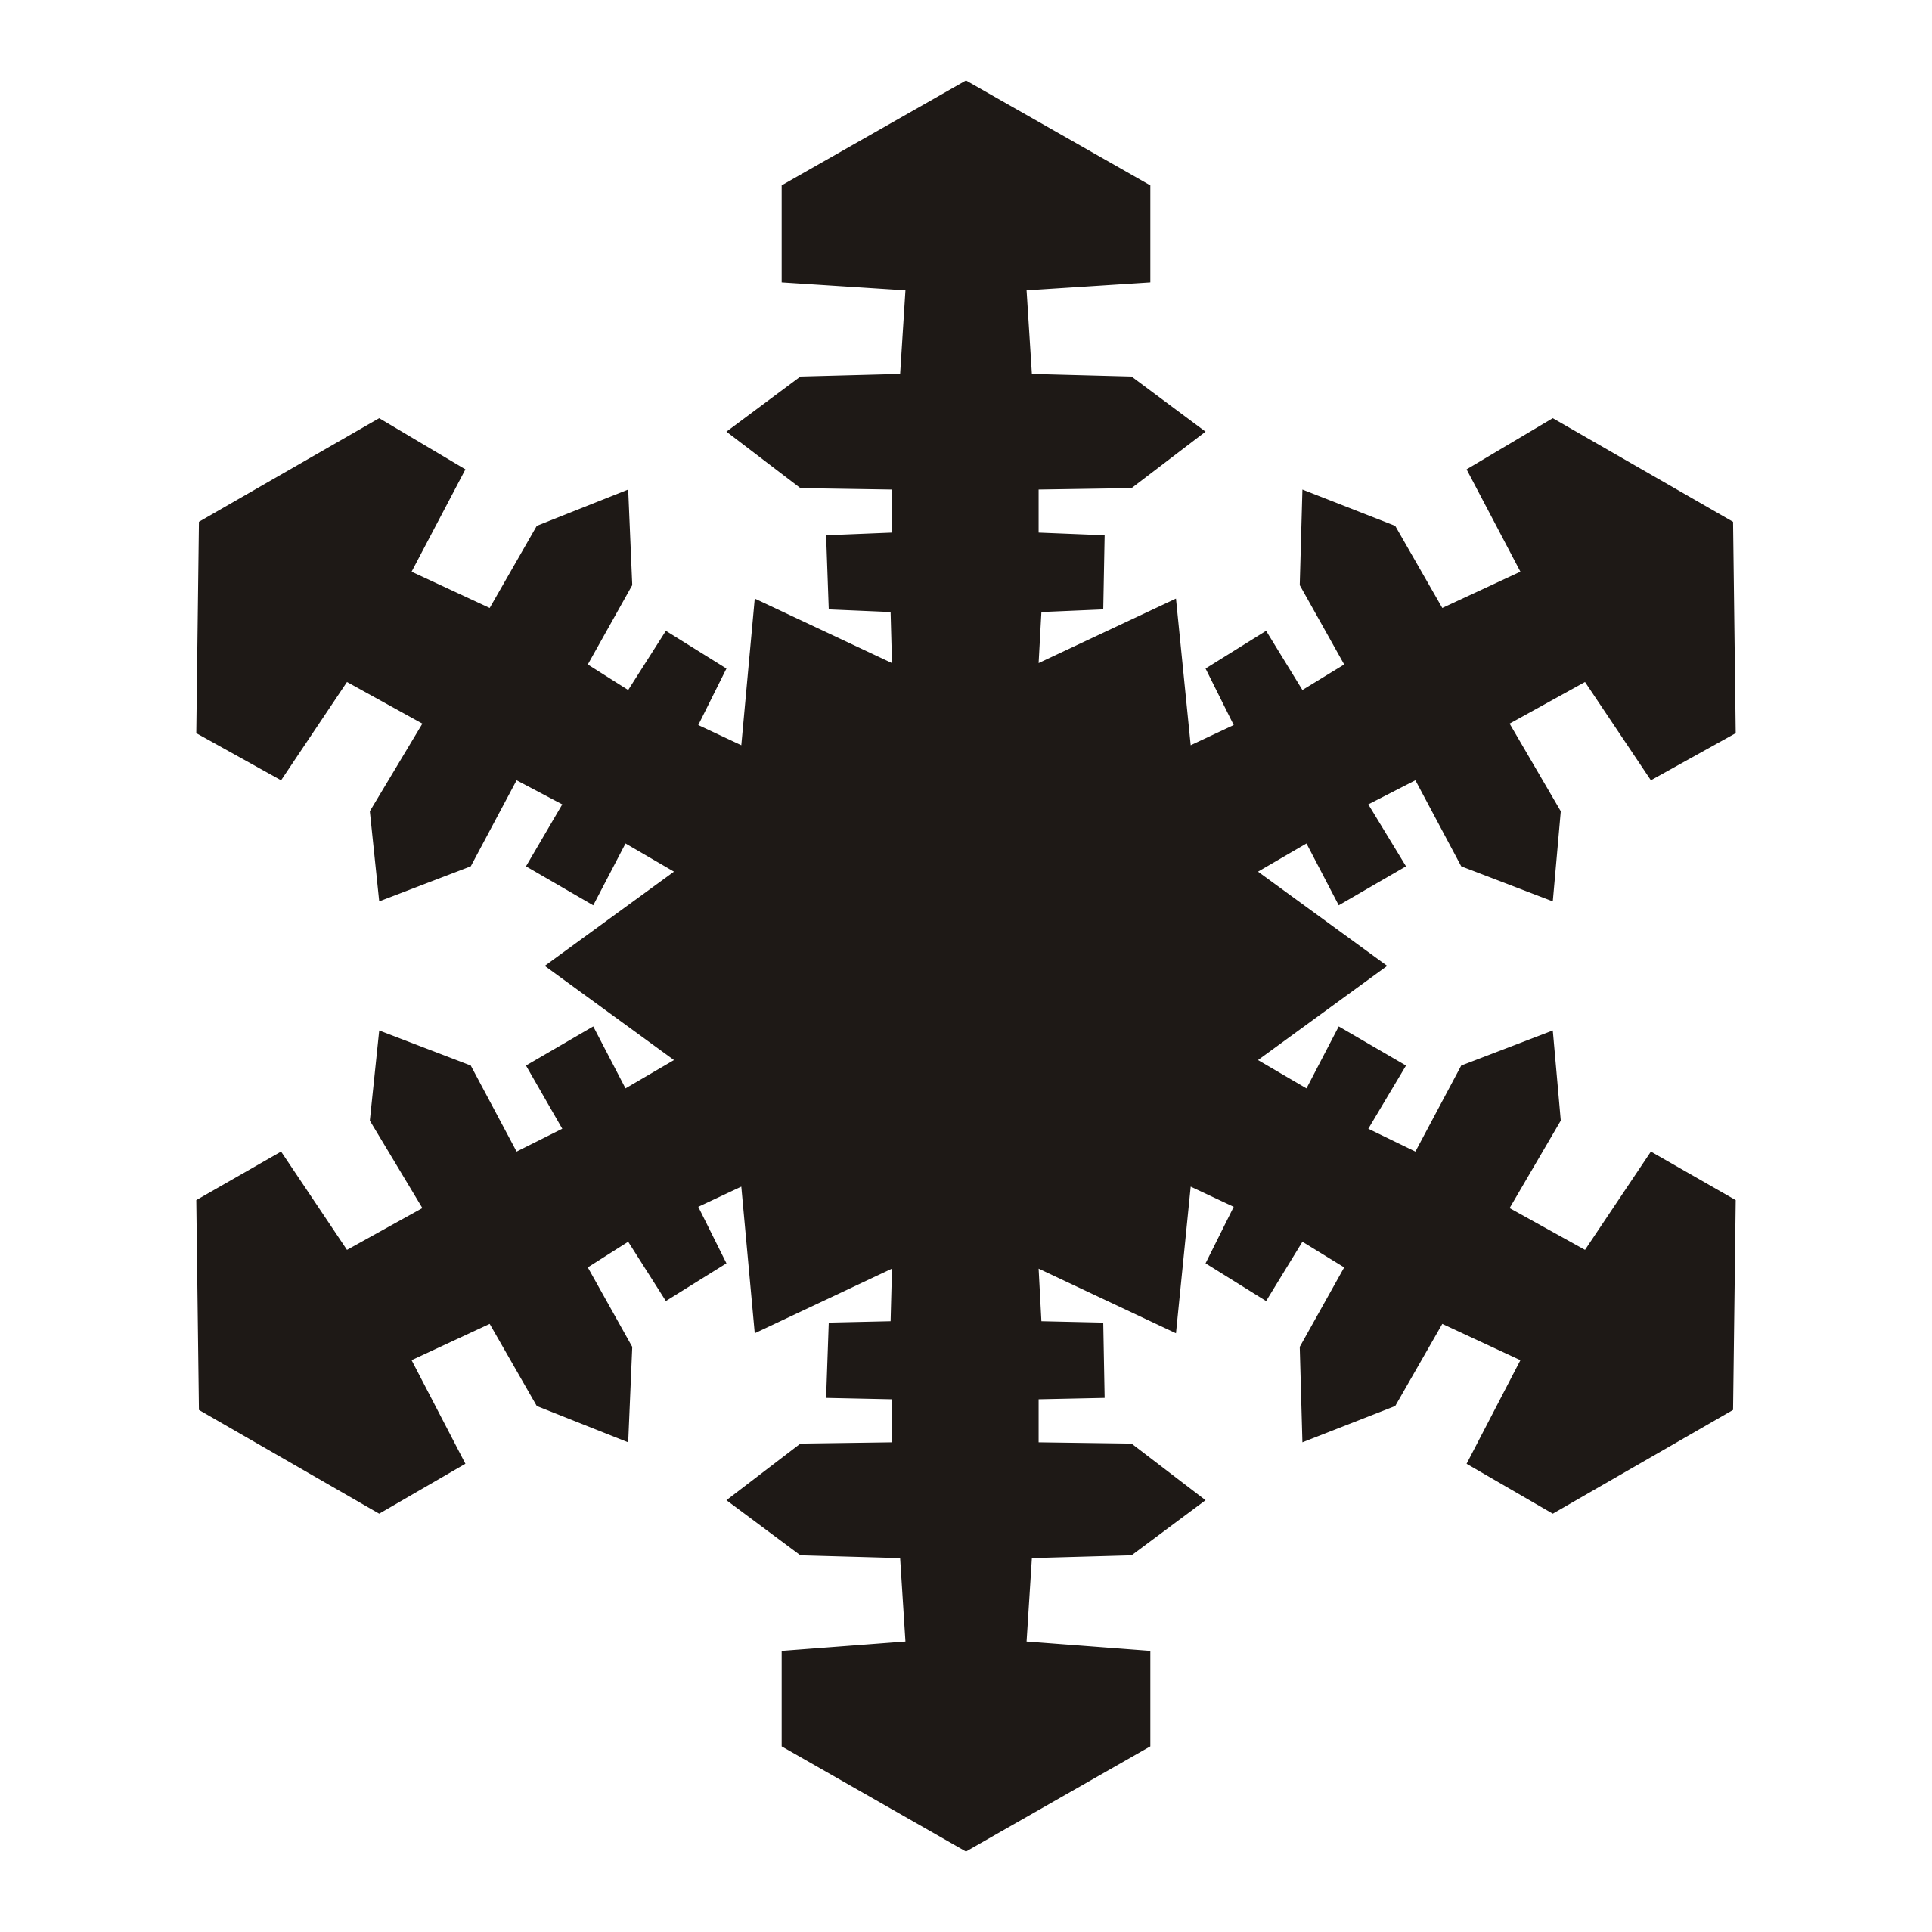 Snowflakes Clipart, Winter Clipart, Vector Graphics, Holiday Clipart,  Digital Clip Art, Commercial Use M457 